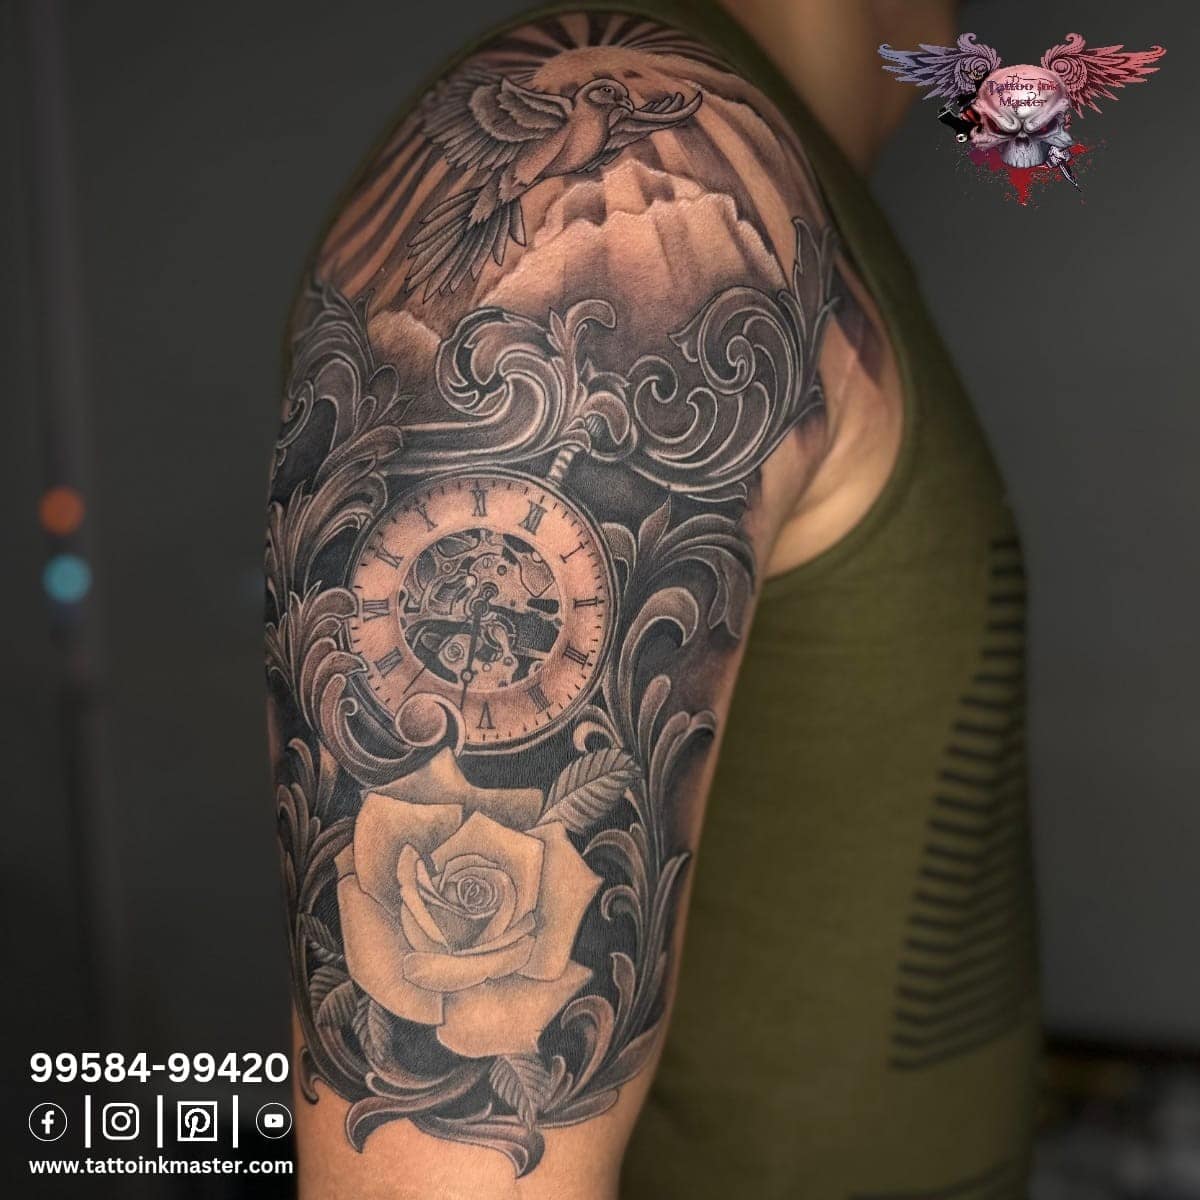 Pocket Watch And Rose Tattoo | Tattoo Ink Master-anthinhphatland.vn